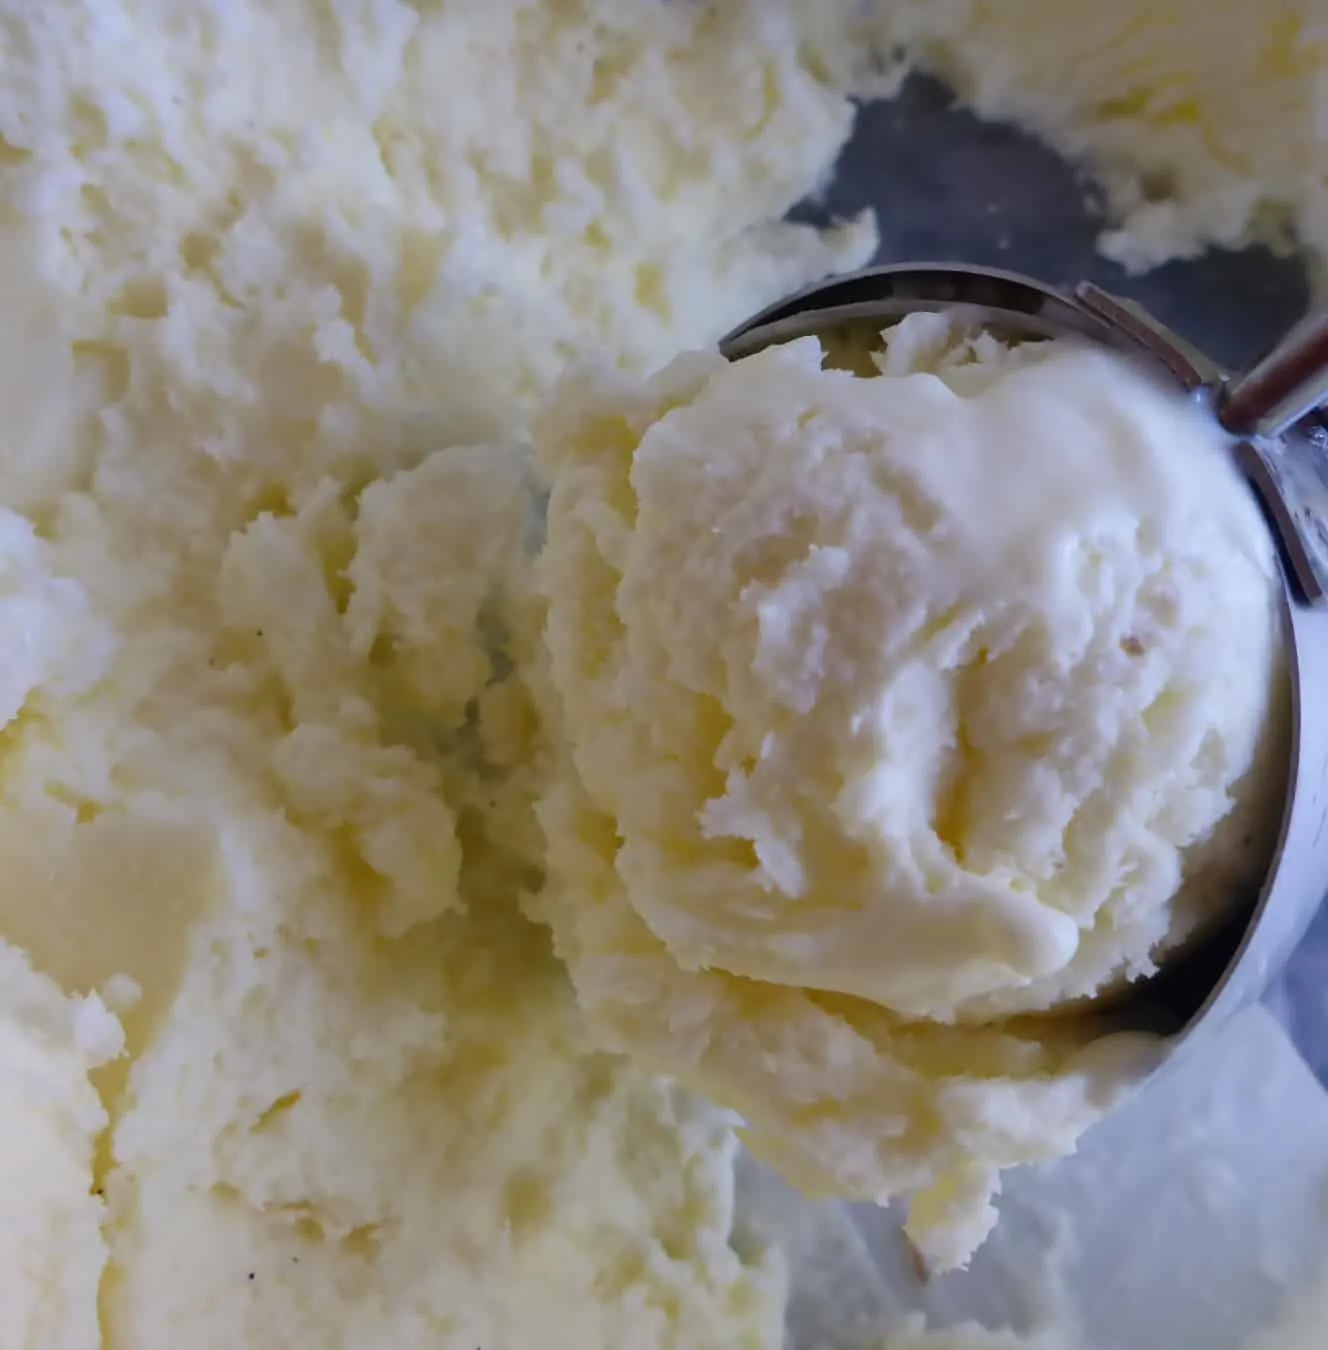 A box of homemade vanilla ice cream, perfectly chilled in the freezer and waiting to be enjoyed. Get your ice cream scoop ready for a delightful serving experience.